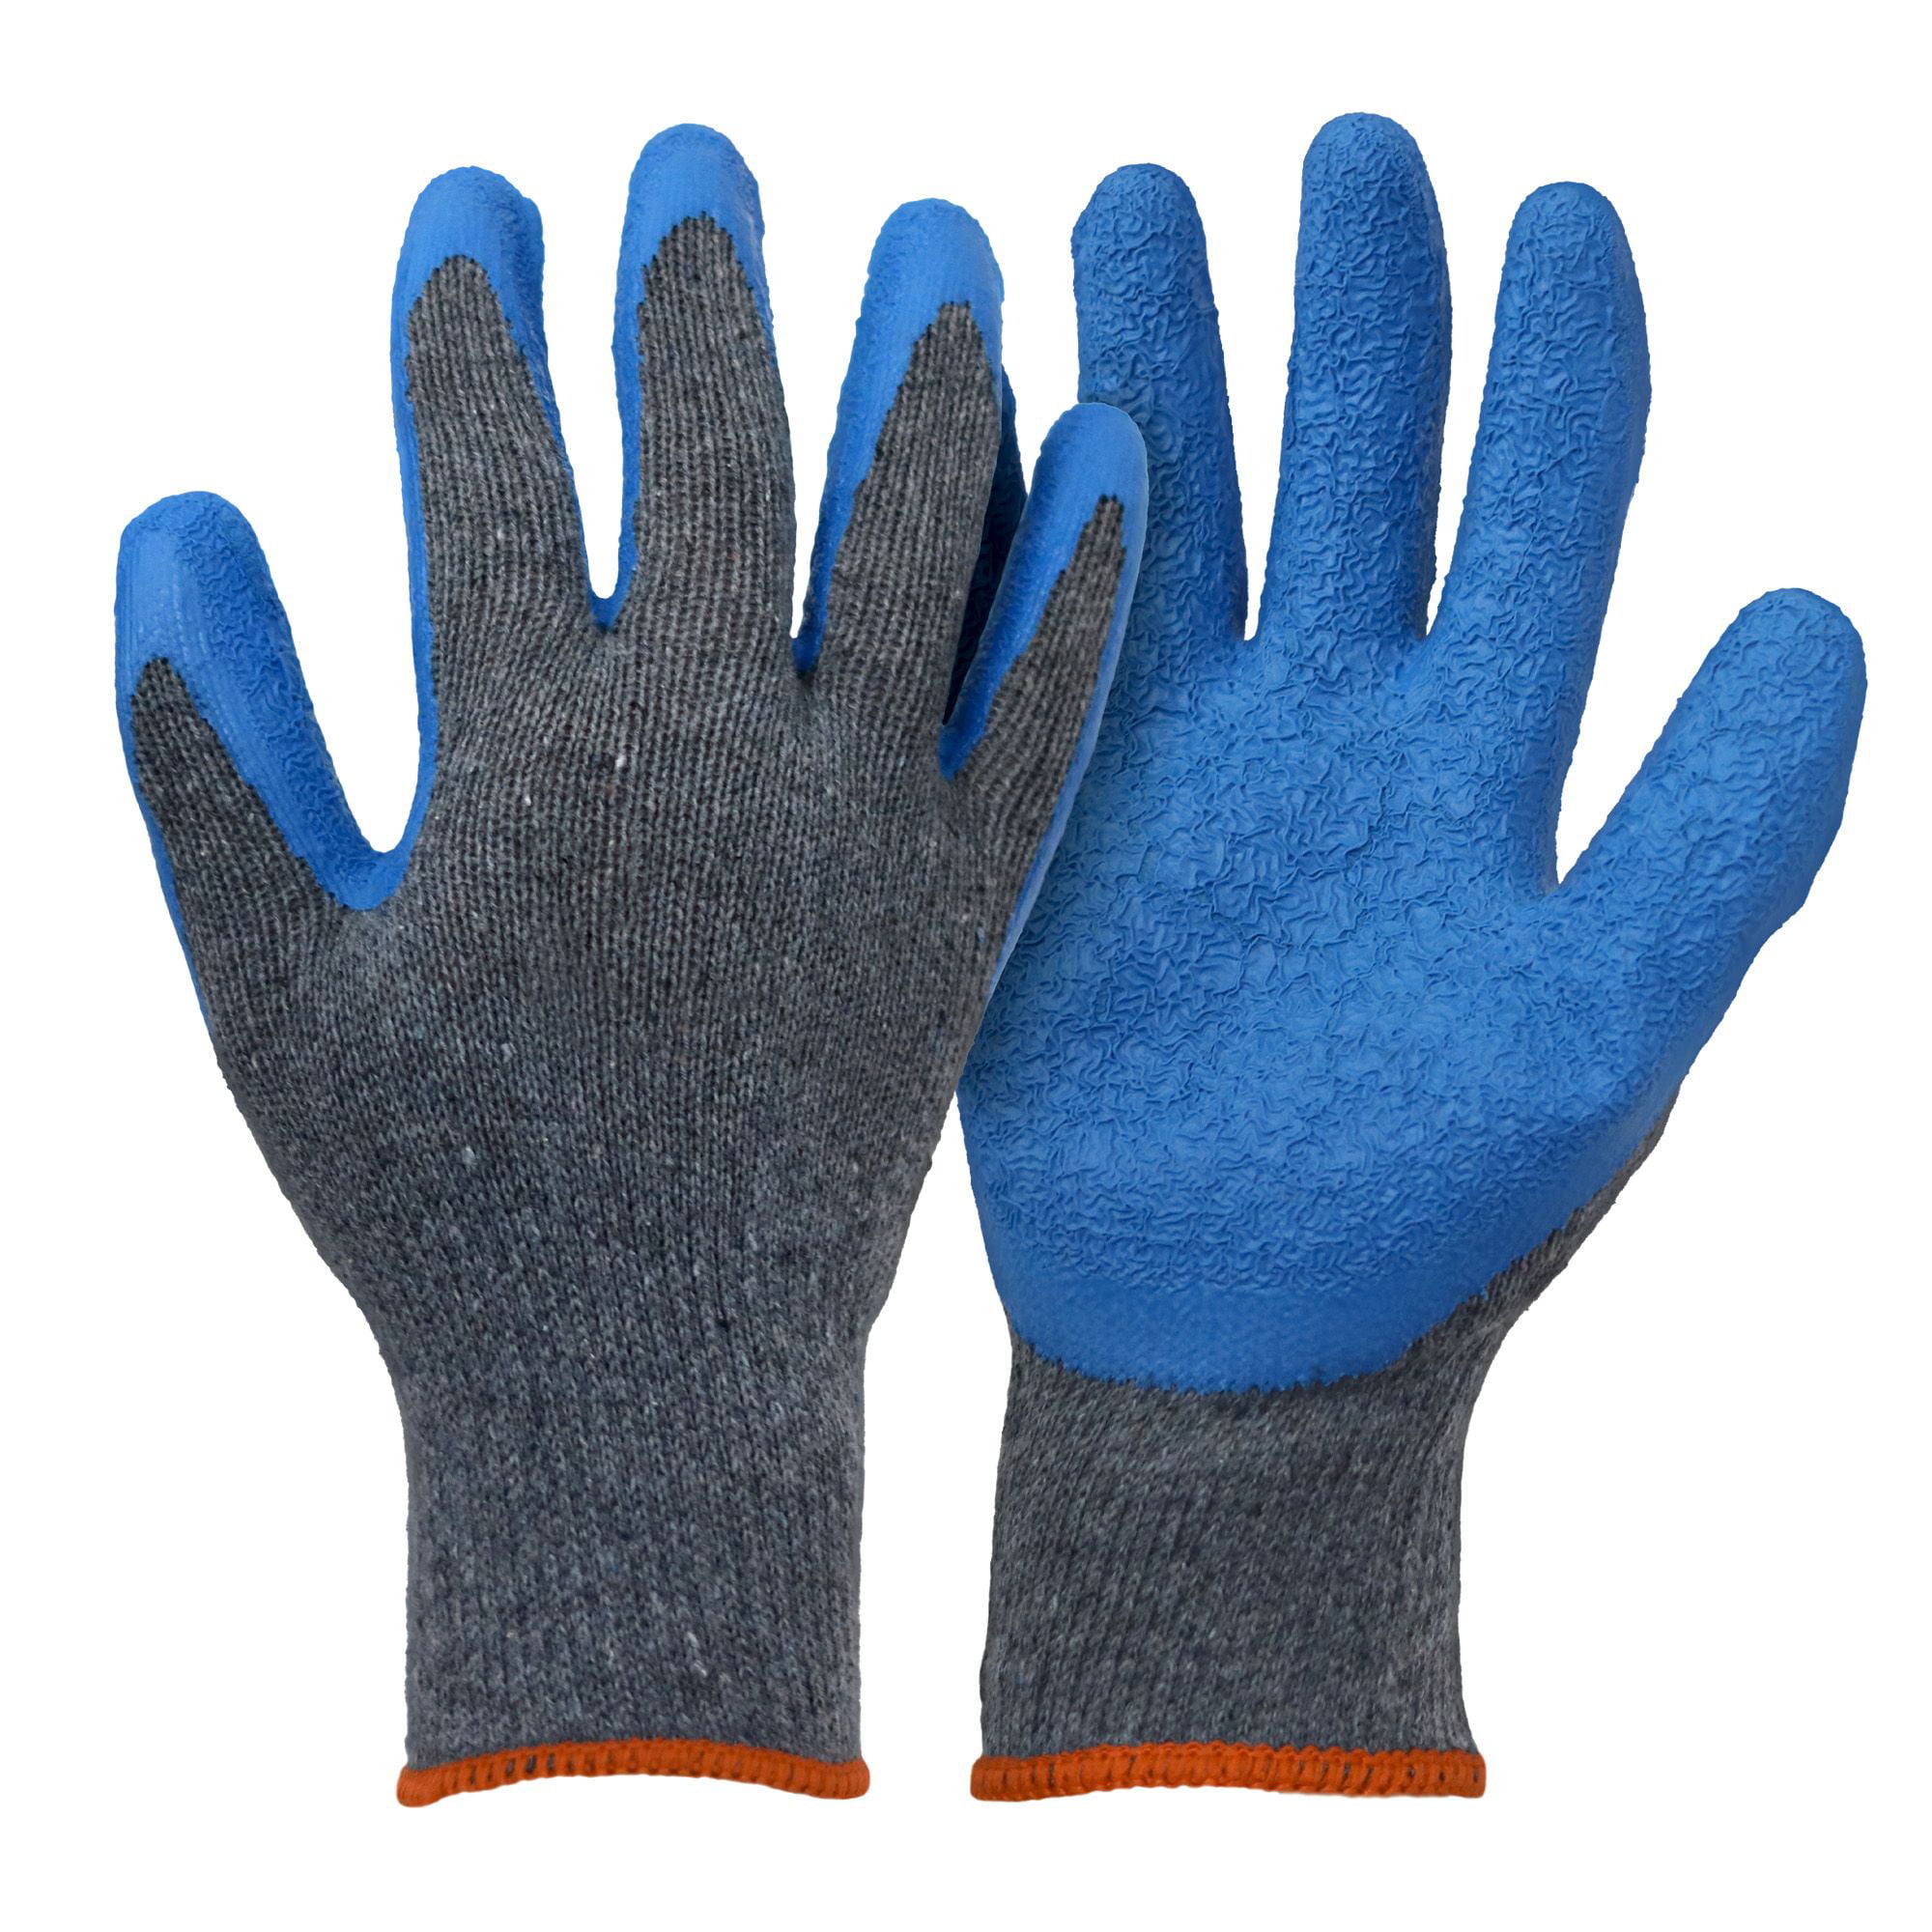 12 24 PAIRS LATEX COATED BUILDERS SAFETY GRIP WORK GLOVES MENS RUBBER GARDENING 